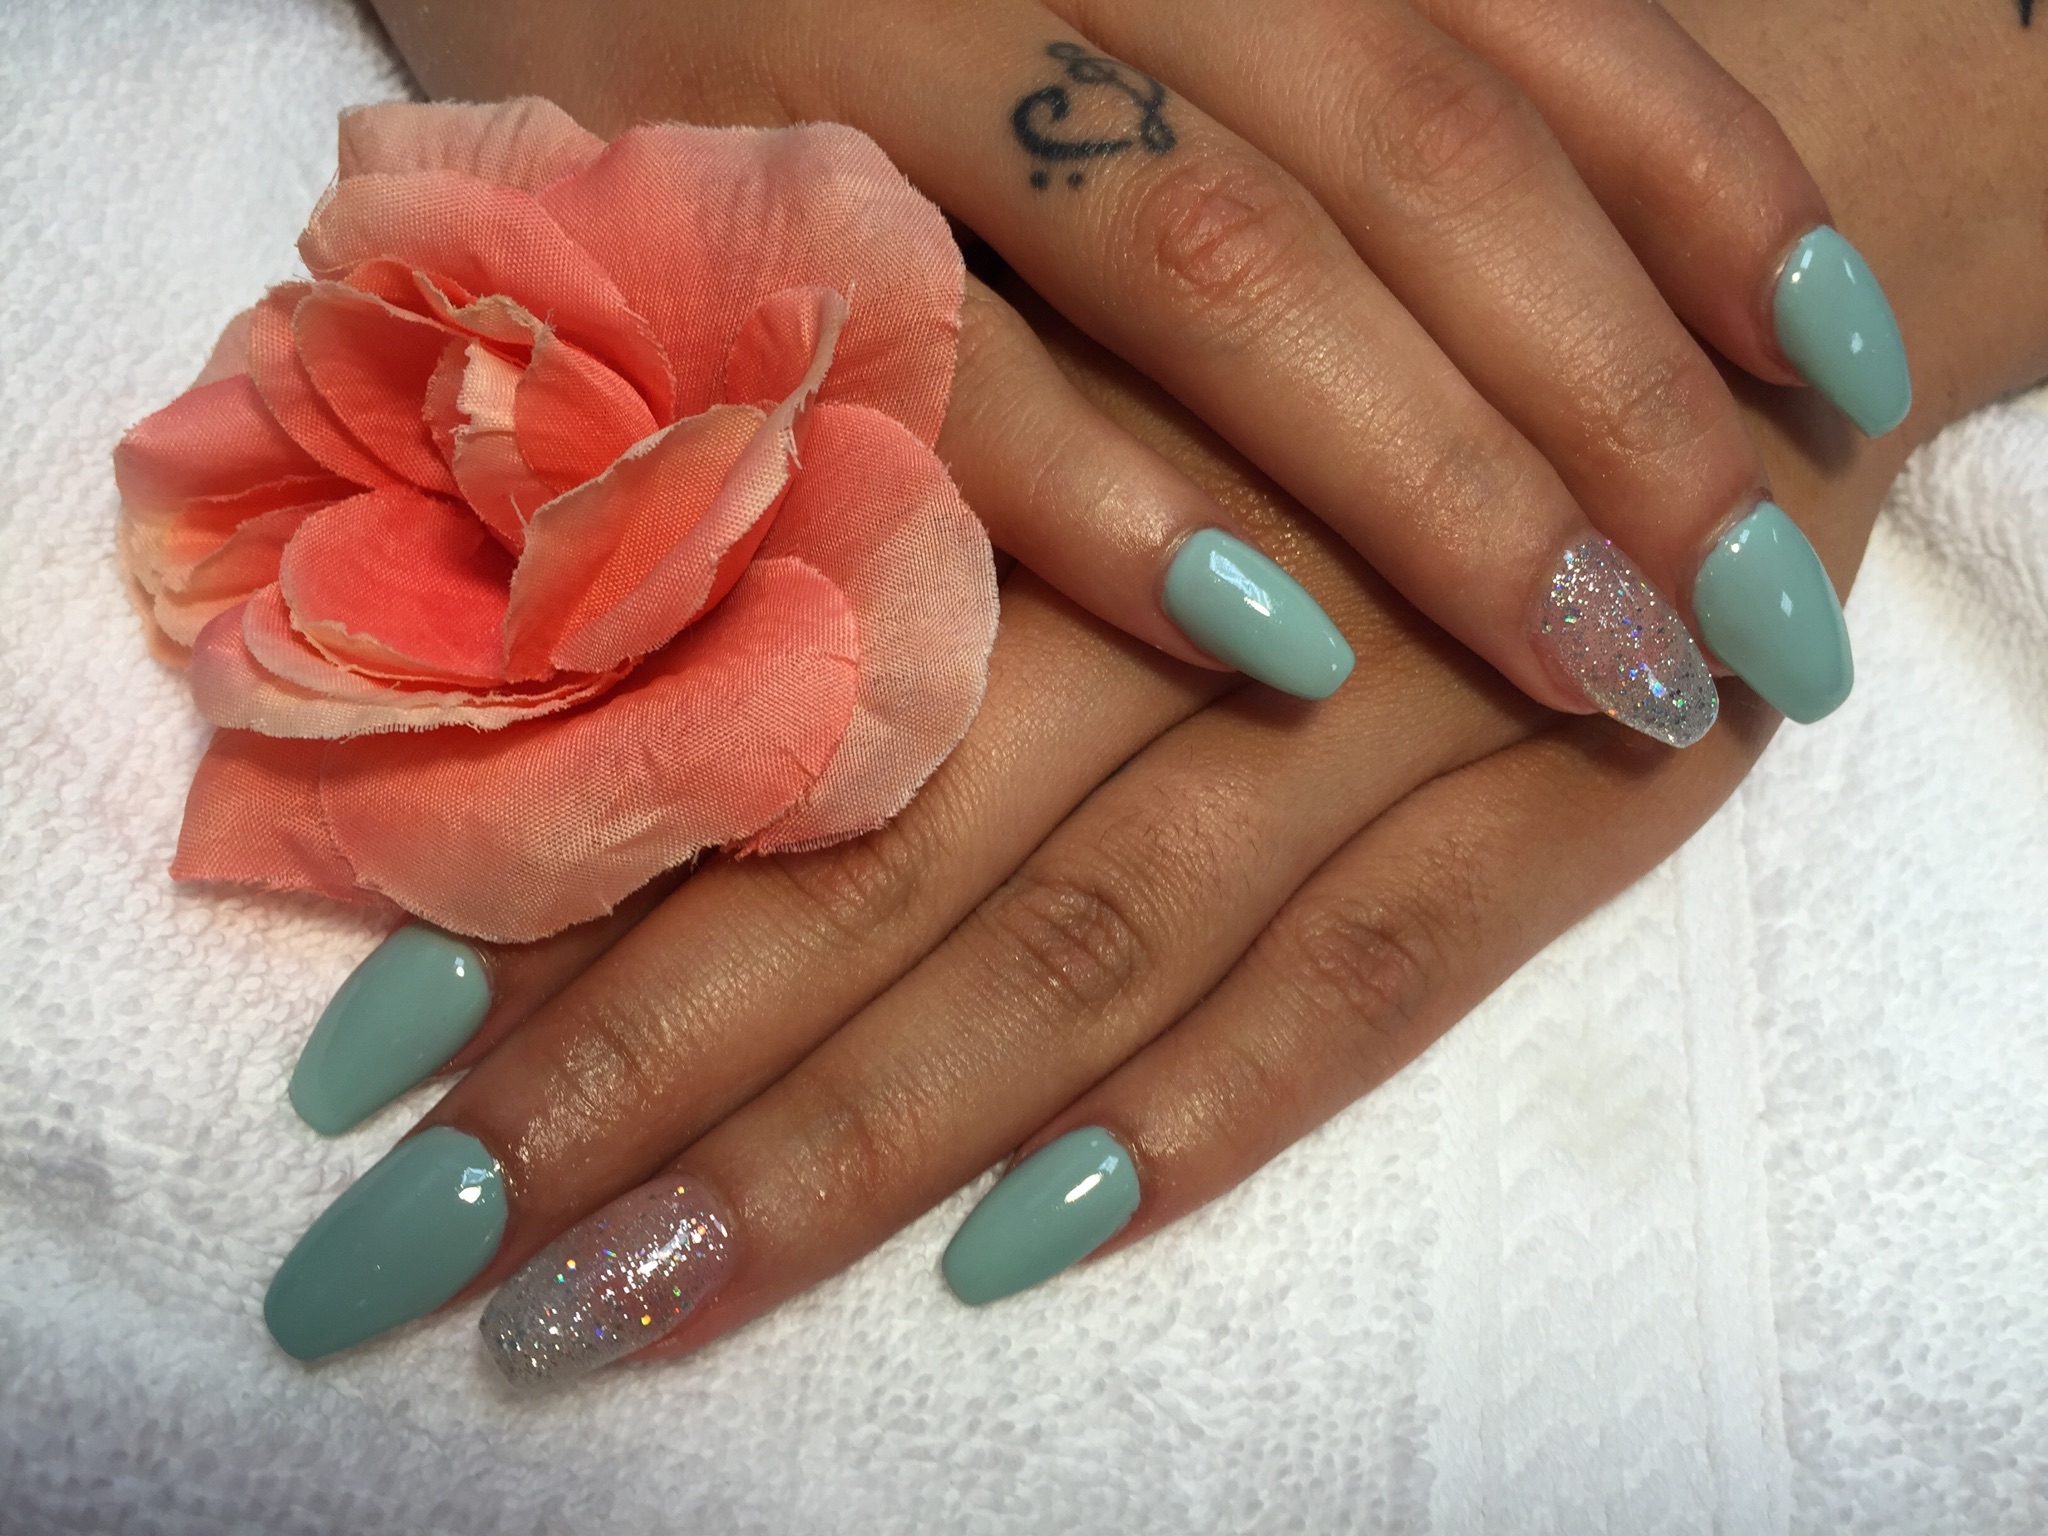 TL Nails & Spa Coupons near me in San Luis Obispo, CA 93401 | 8coupons